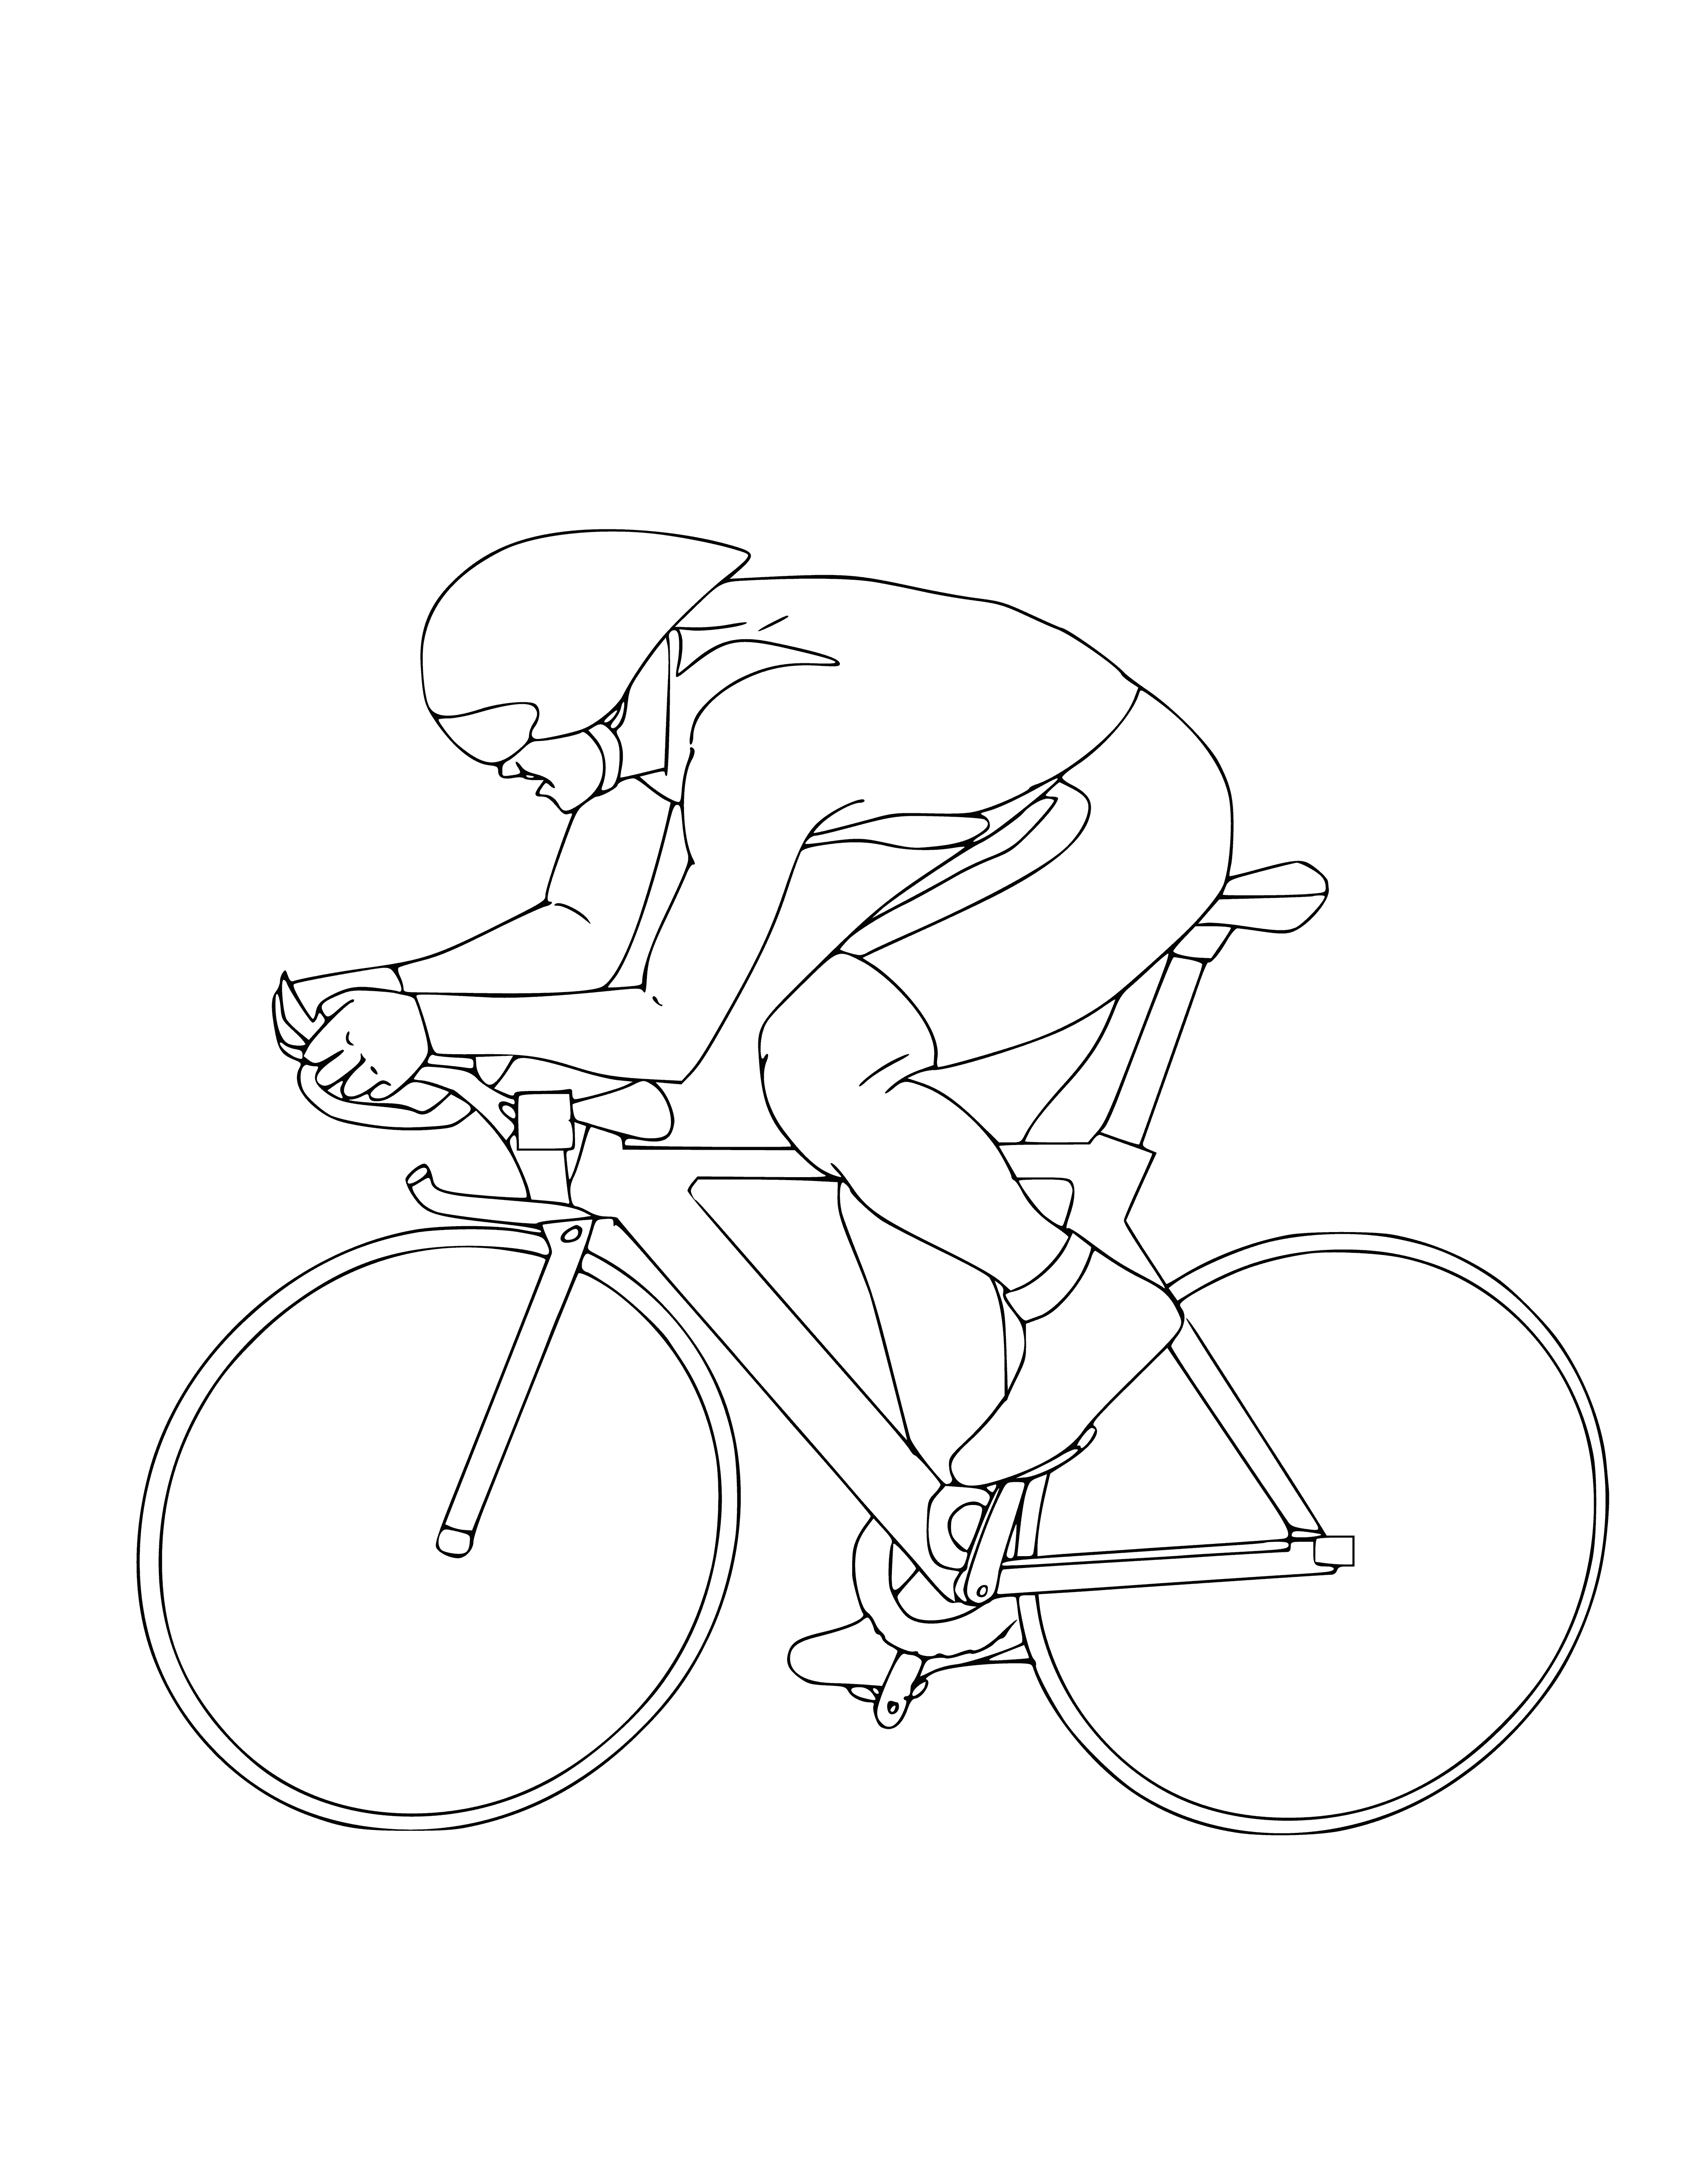 Track bike race coloring page